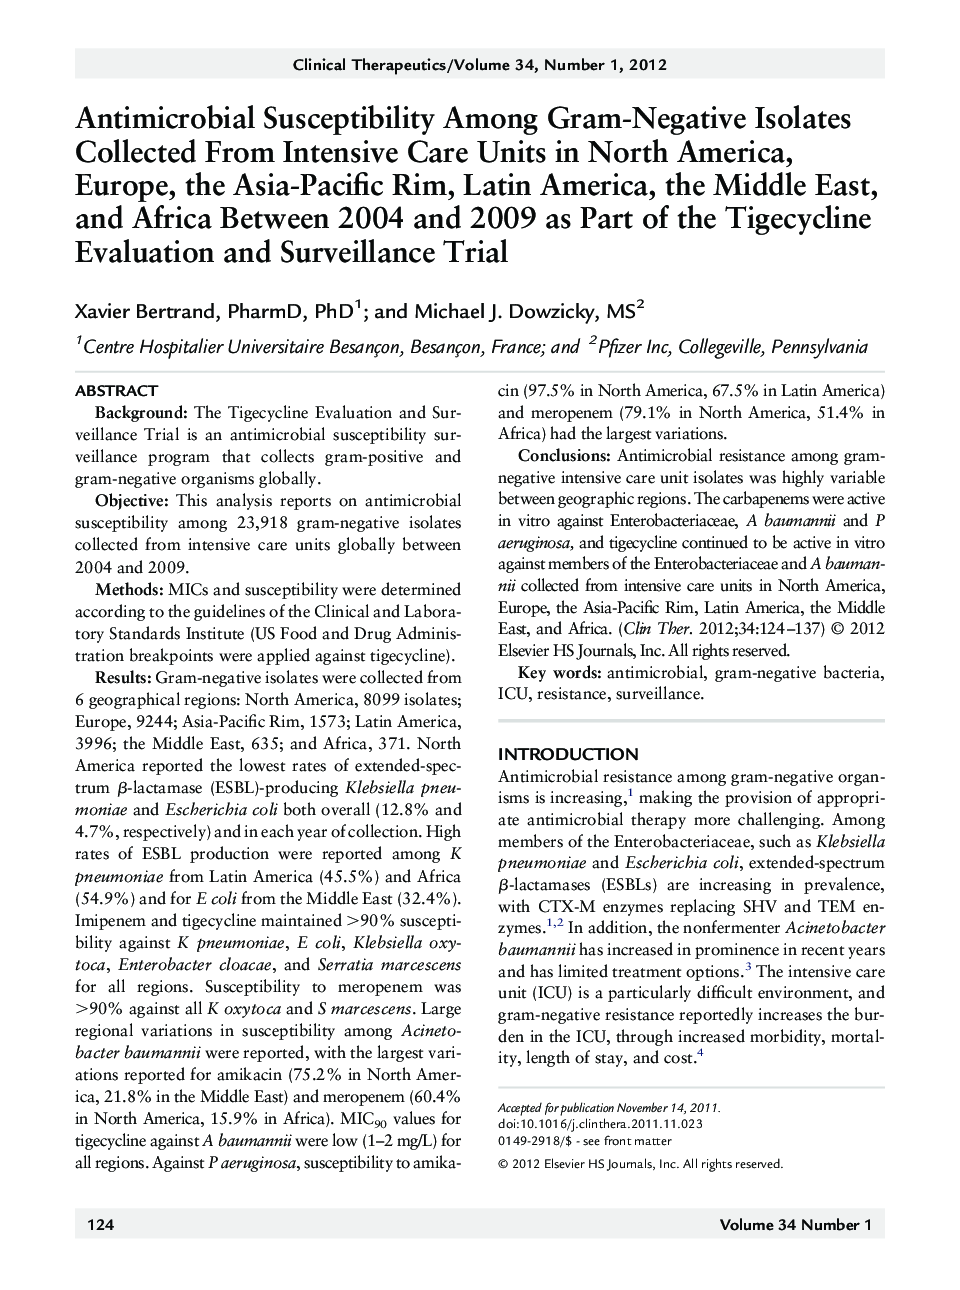 Antimicrobial Susceptibility Among Gram-Negative Isolates Collected From Intensive Care Units in North America, Europe, the Asia-Pacific Rim, Latin America, the Middle East, and Africa Between 2004 and 2009 as Part of the Tigecycline Evaluation and Survei